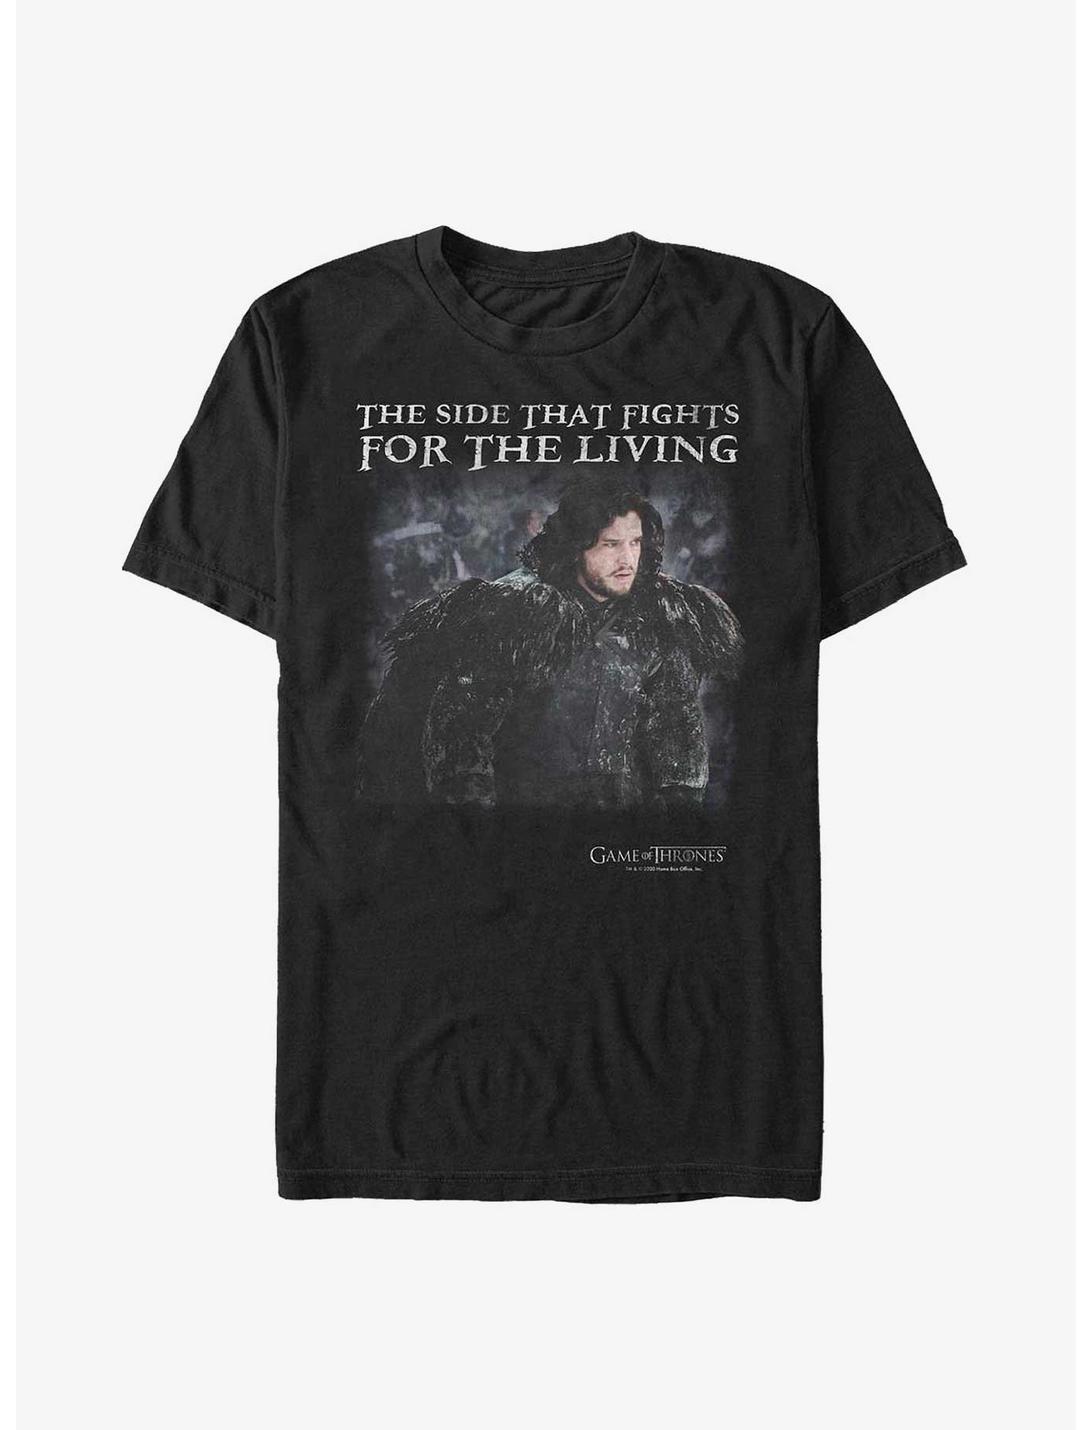 Plus Size Game Of Thrones Jon Snow Side That Fights For The Living T-Shirt, BLACK, hi-res